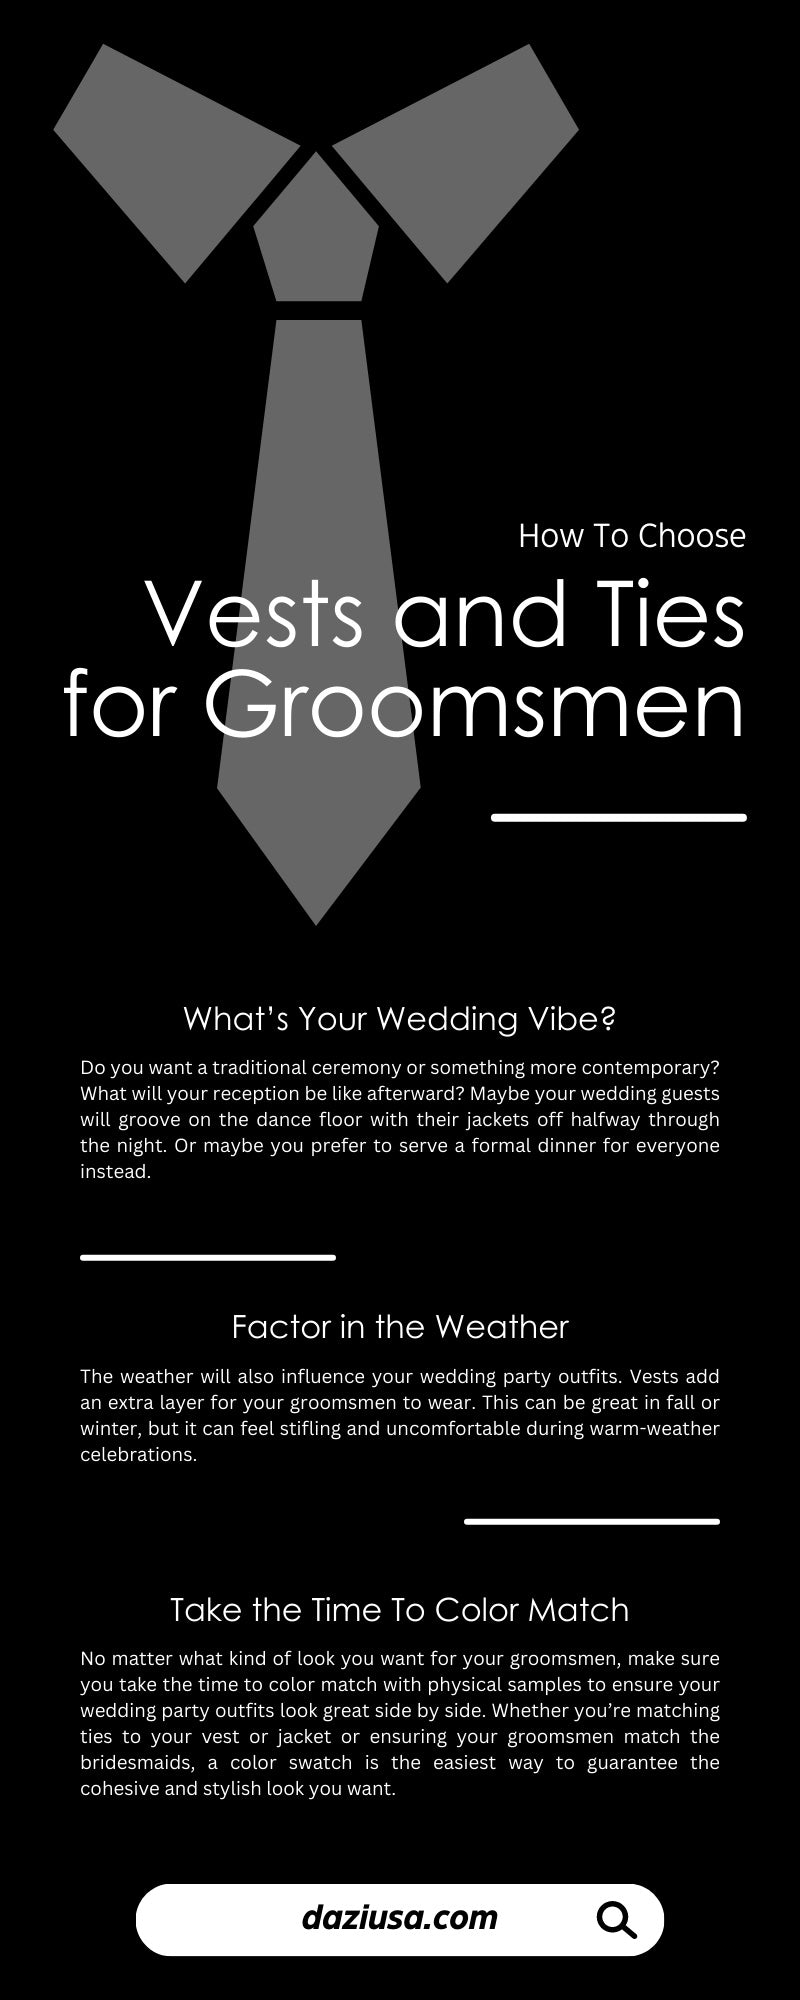 How To Choose Vests and Ties for Groomsmen